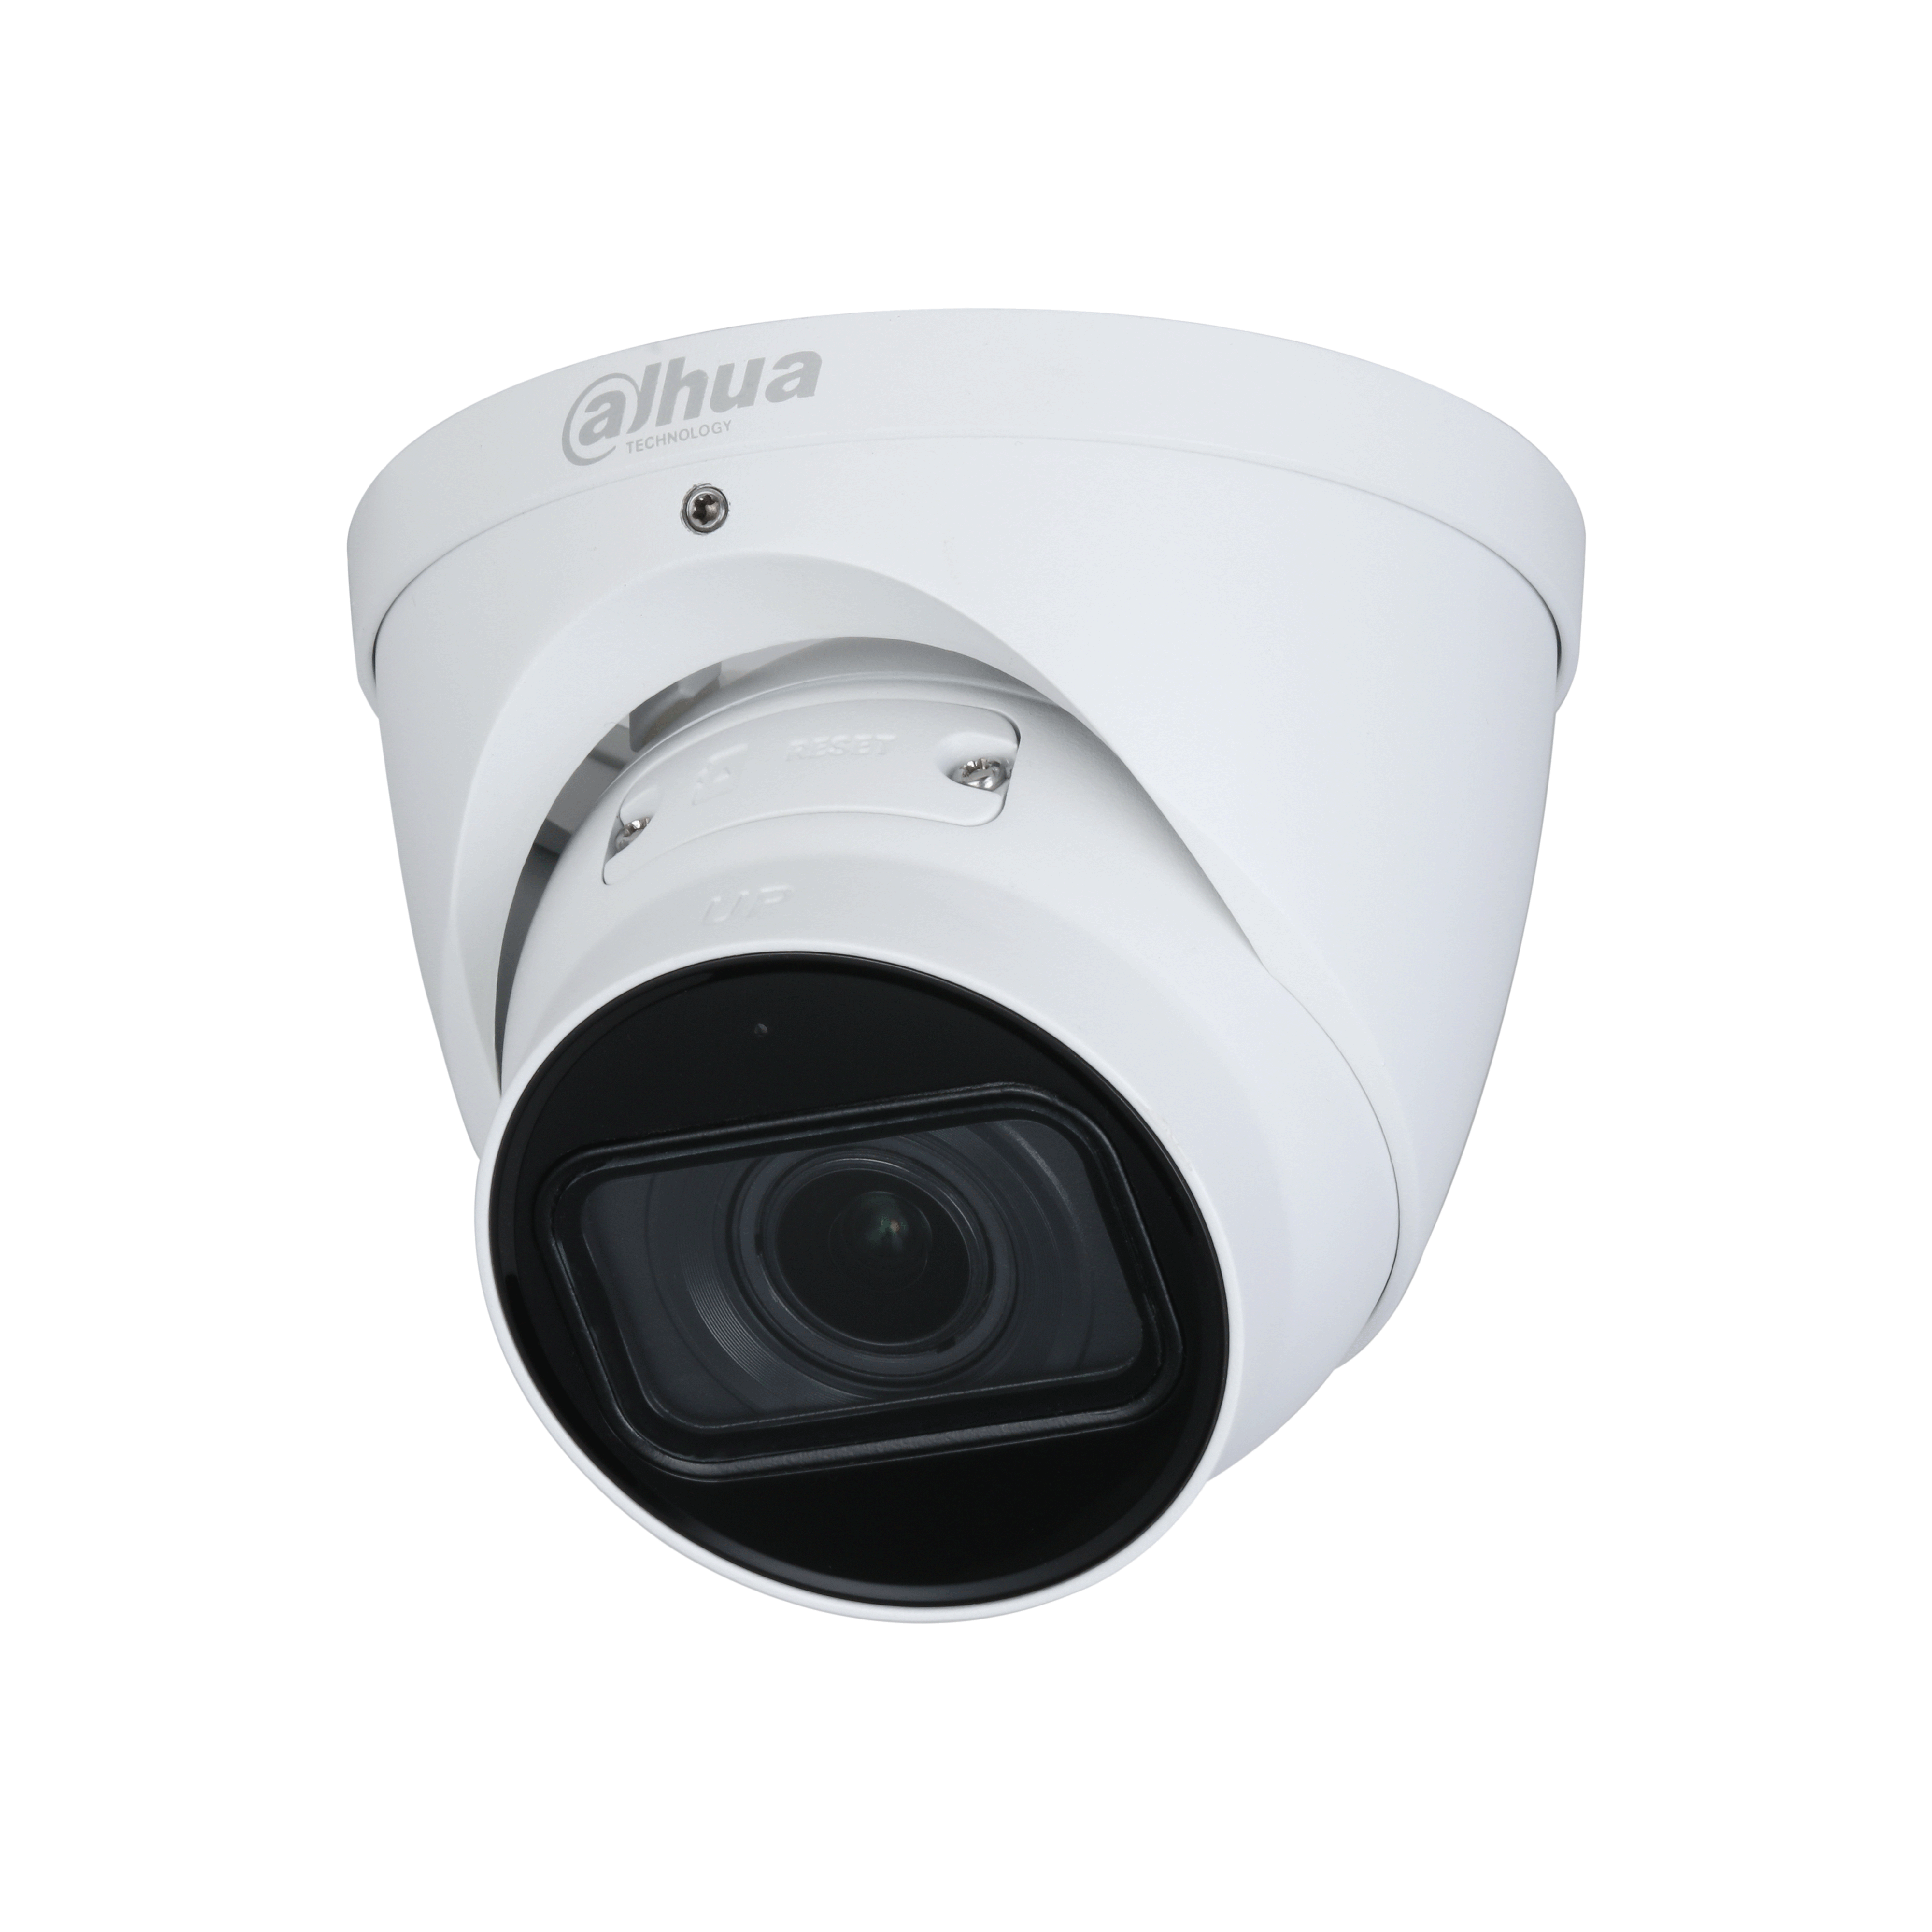 WIZMIND S SERIES IP CAMERA WHITE AI PEOPLE COUNT 4MP H.264/4+/5/5+ TURRET 140 TRUE WDR PLASTIC/METAL 2.7-12MM MOTORISED LENS 4X ZOOM DEEP LIGHT IR 40M EPOE IP67 BUILT IN MIC SUPPORT UP TO 512GB SD 12VDC